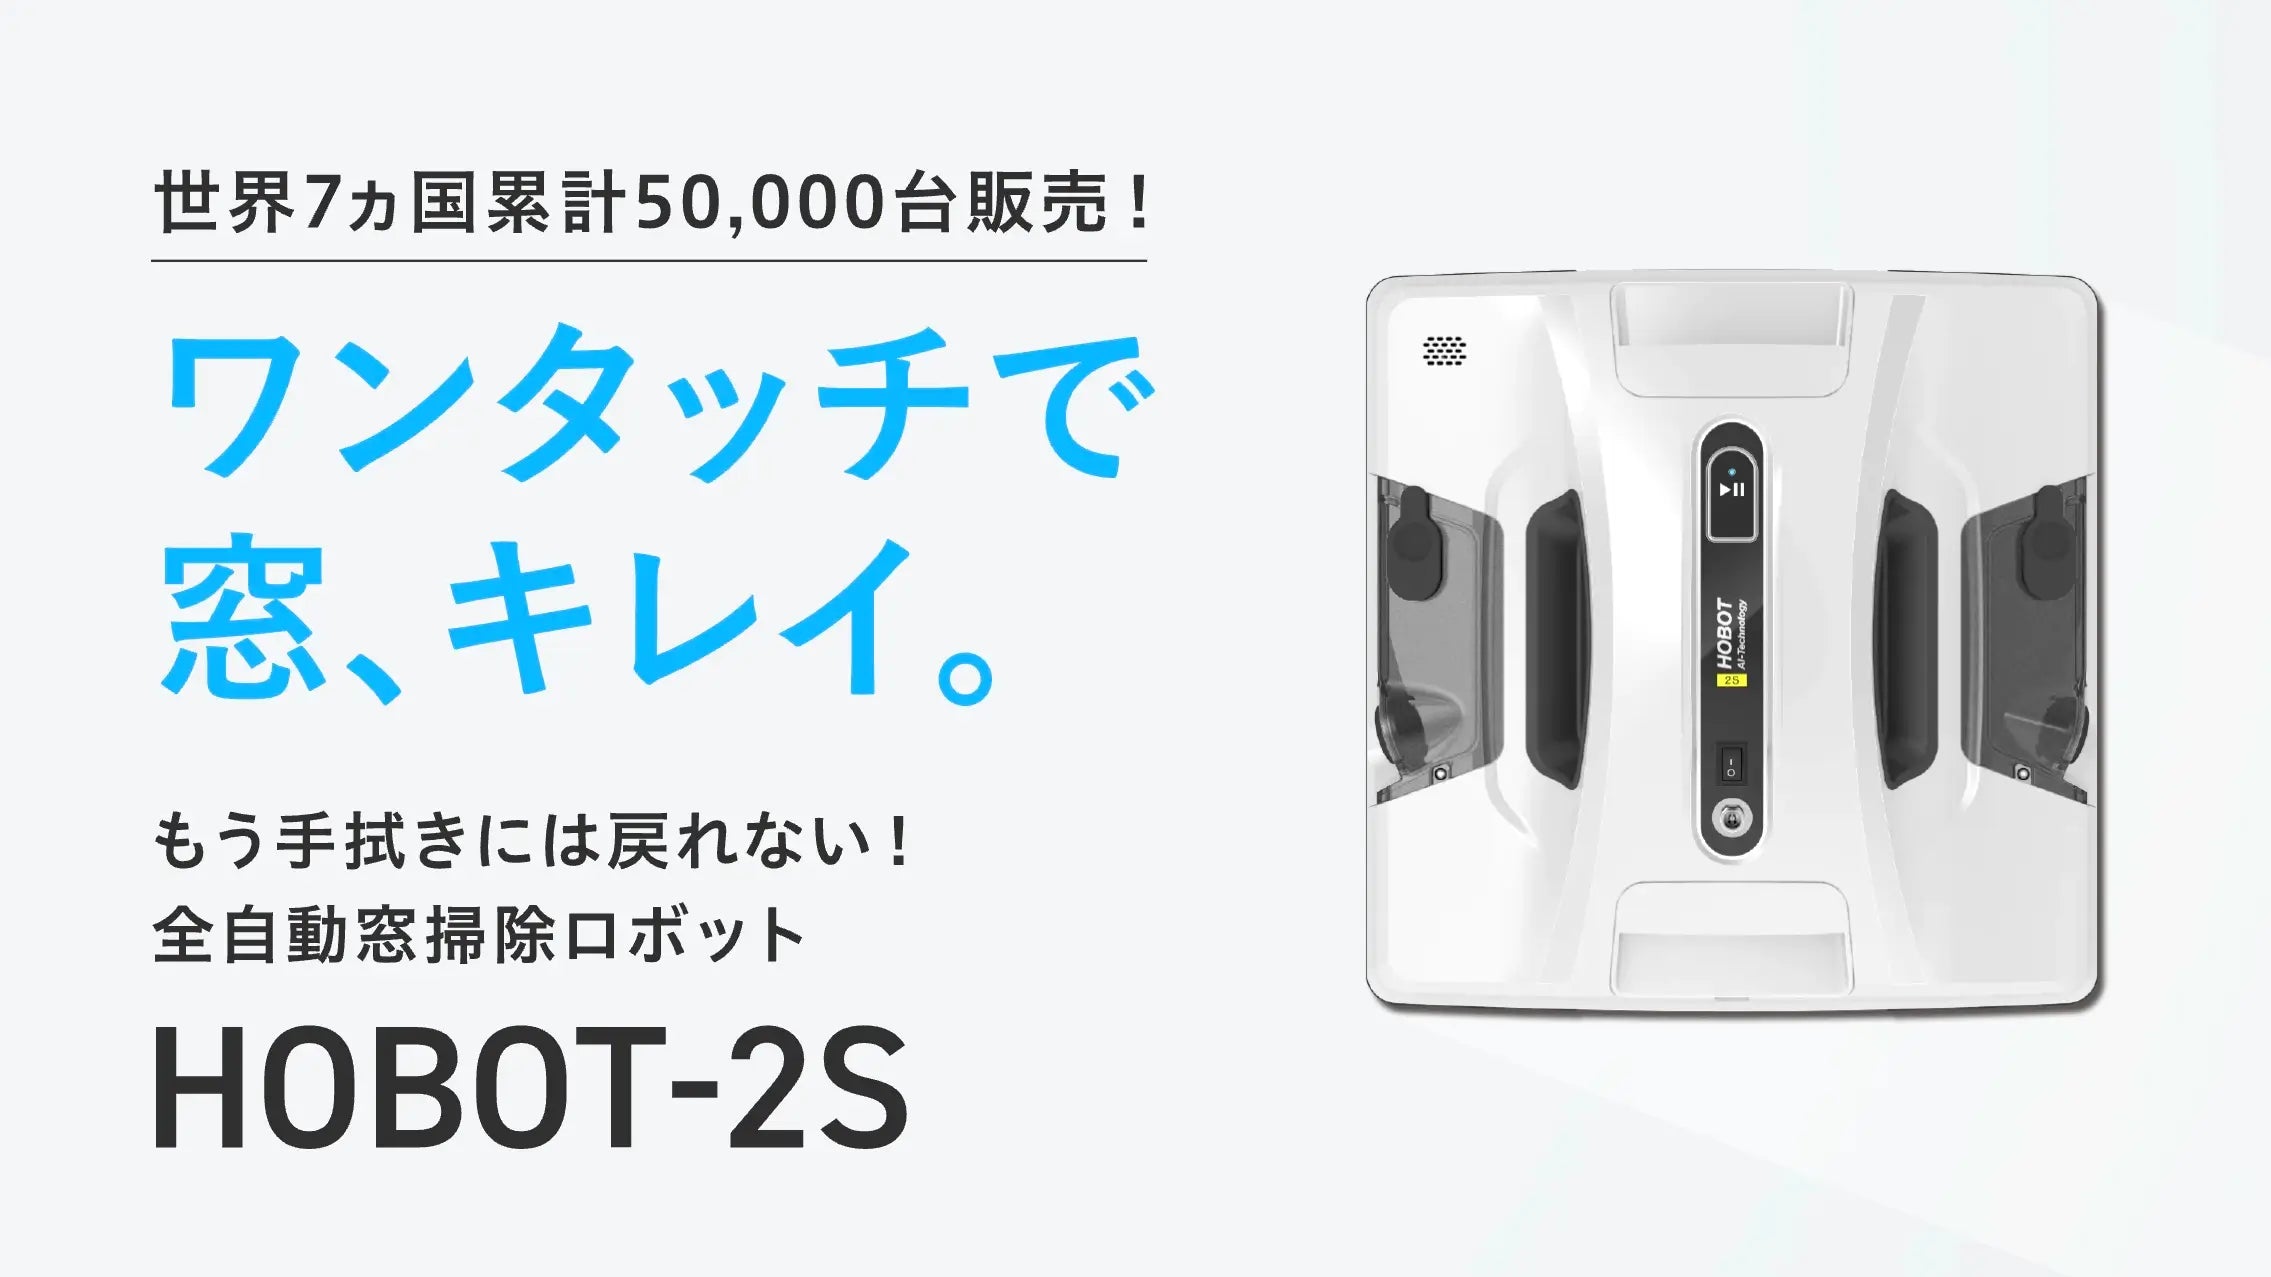 50%OFF!】 HOBOT-R3 窓掃除ロボット ホボットジャパン 公式 父の日 窓拭きロボット ガラスクリーナー 強力吸引 水拭き 乾拭き  落下防止 AI搭載 簡単